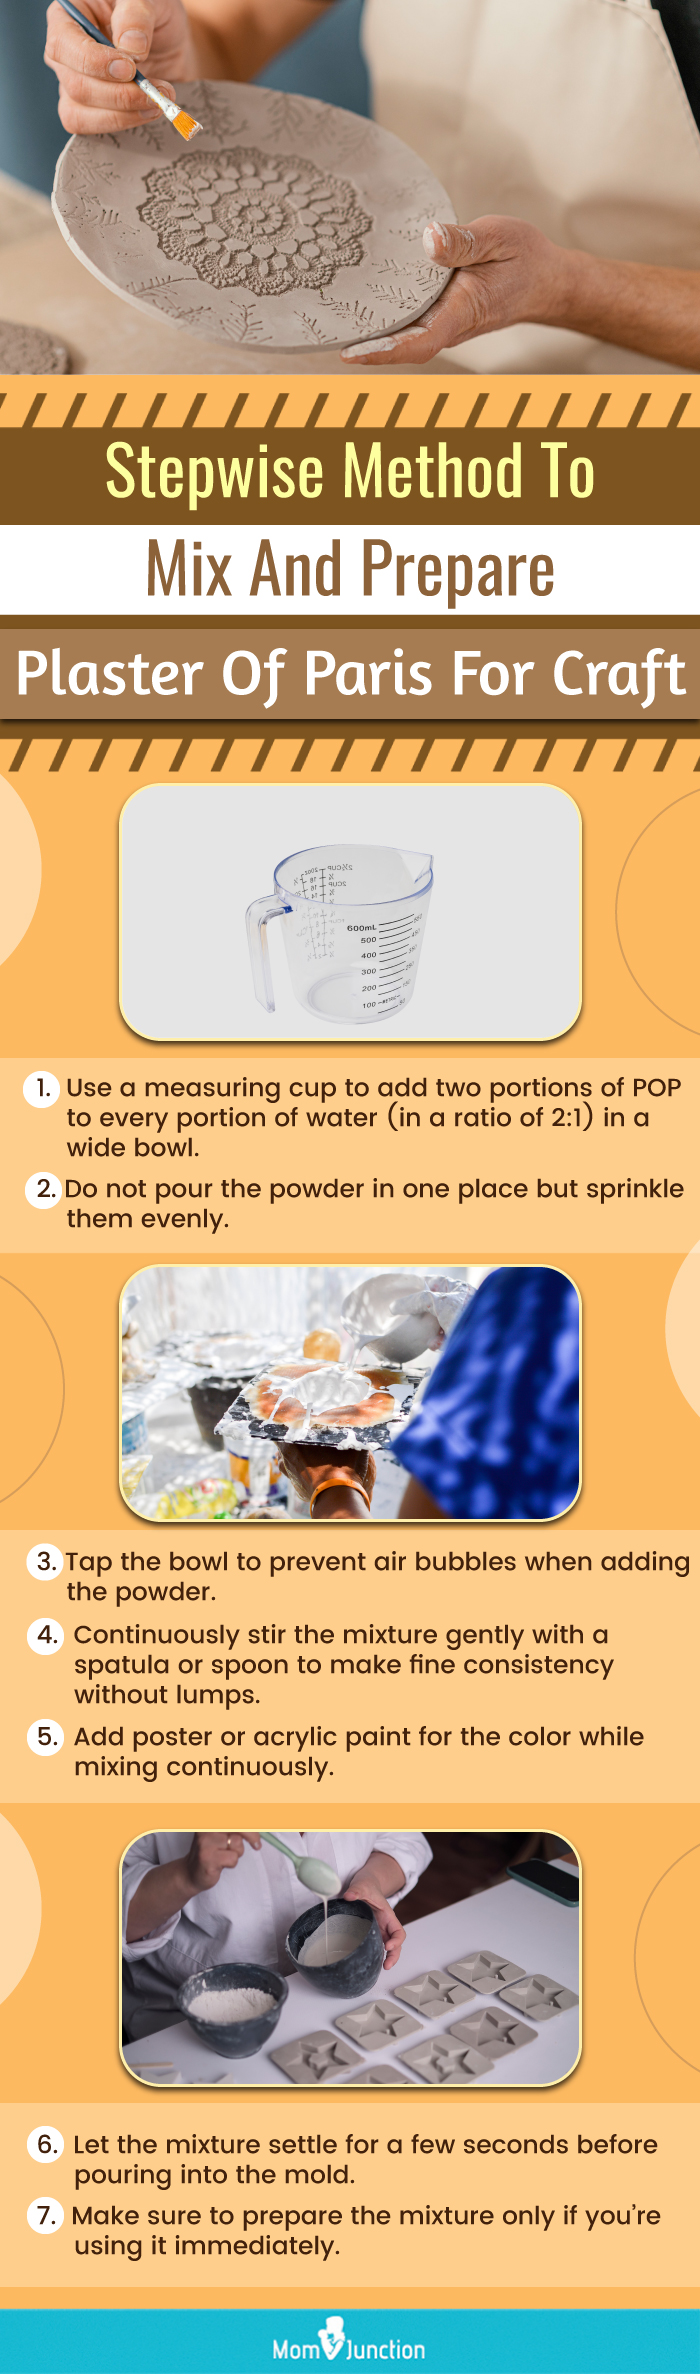 stepwise method to mix and prepare plaster of paris for craft (infographic)